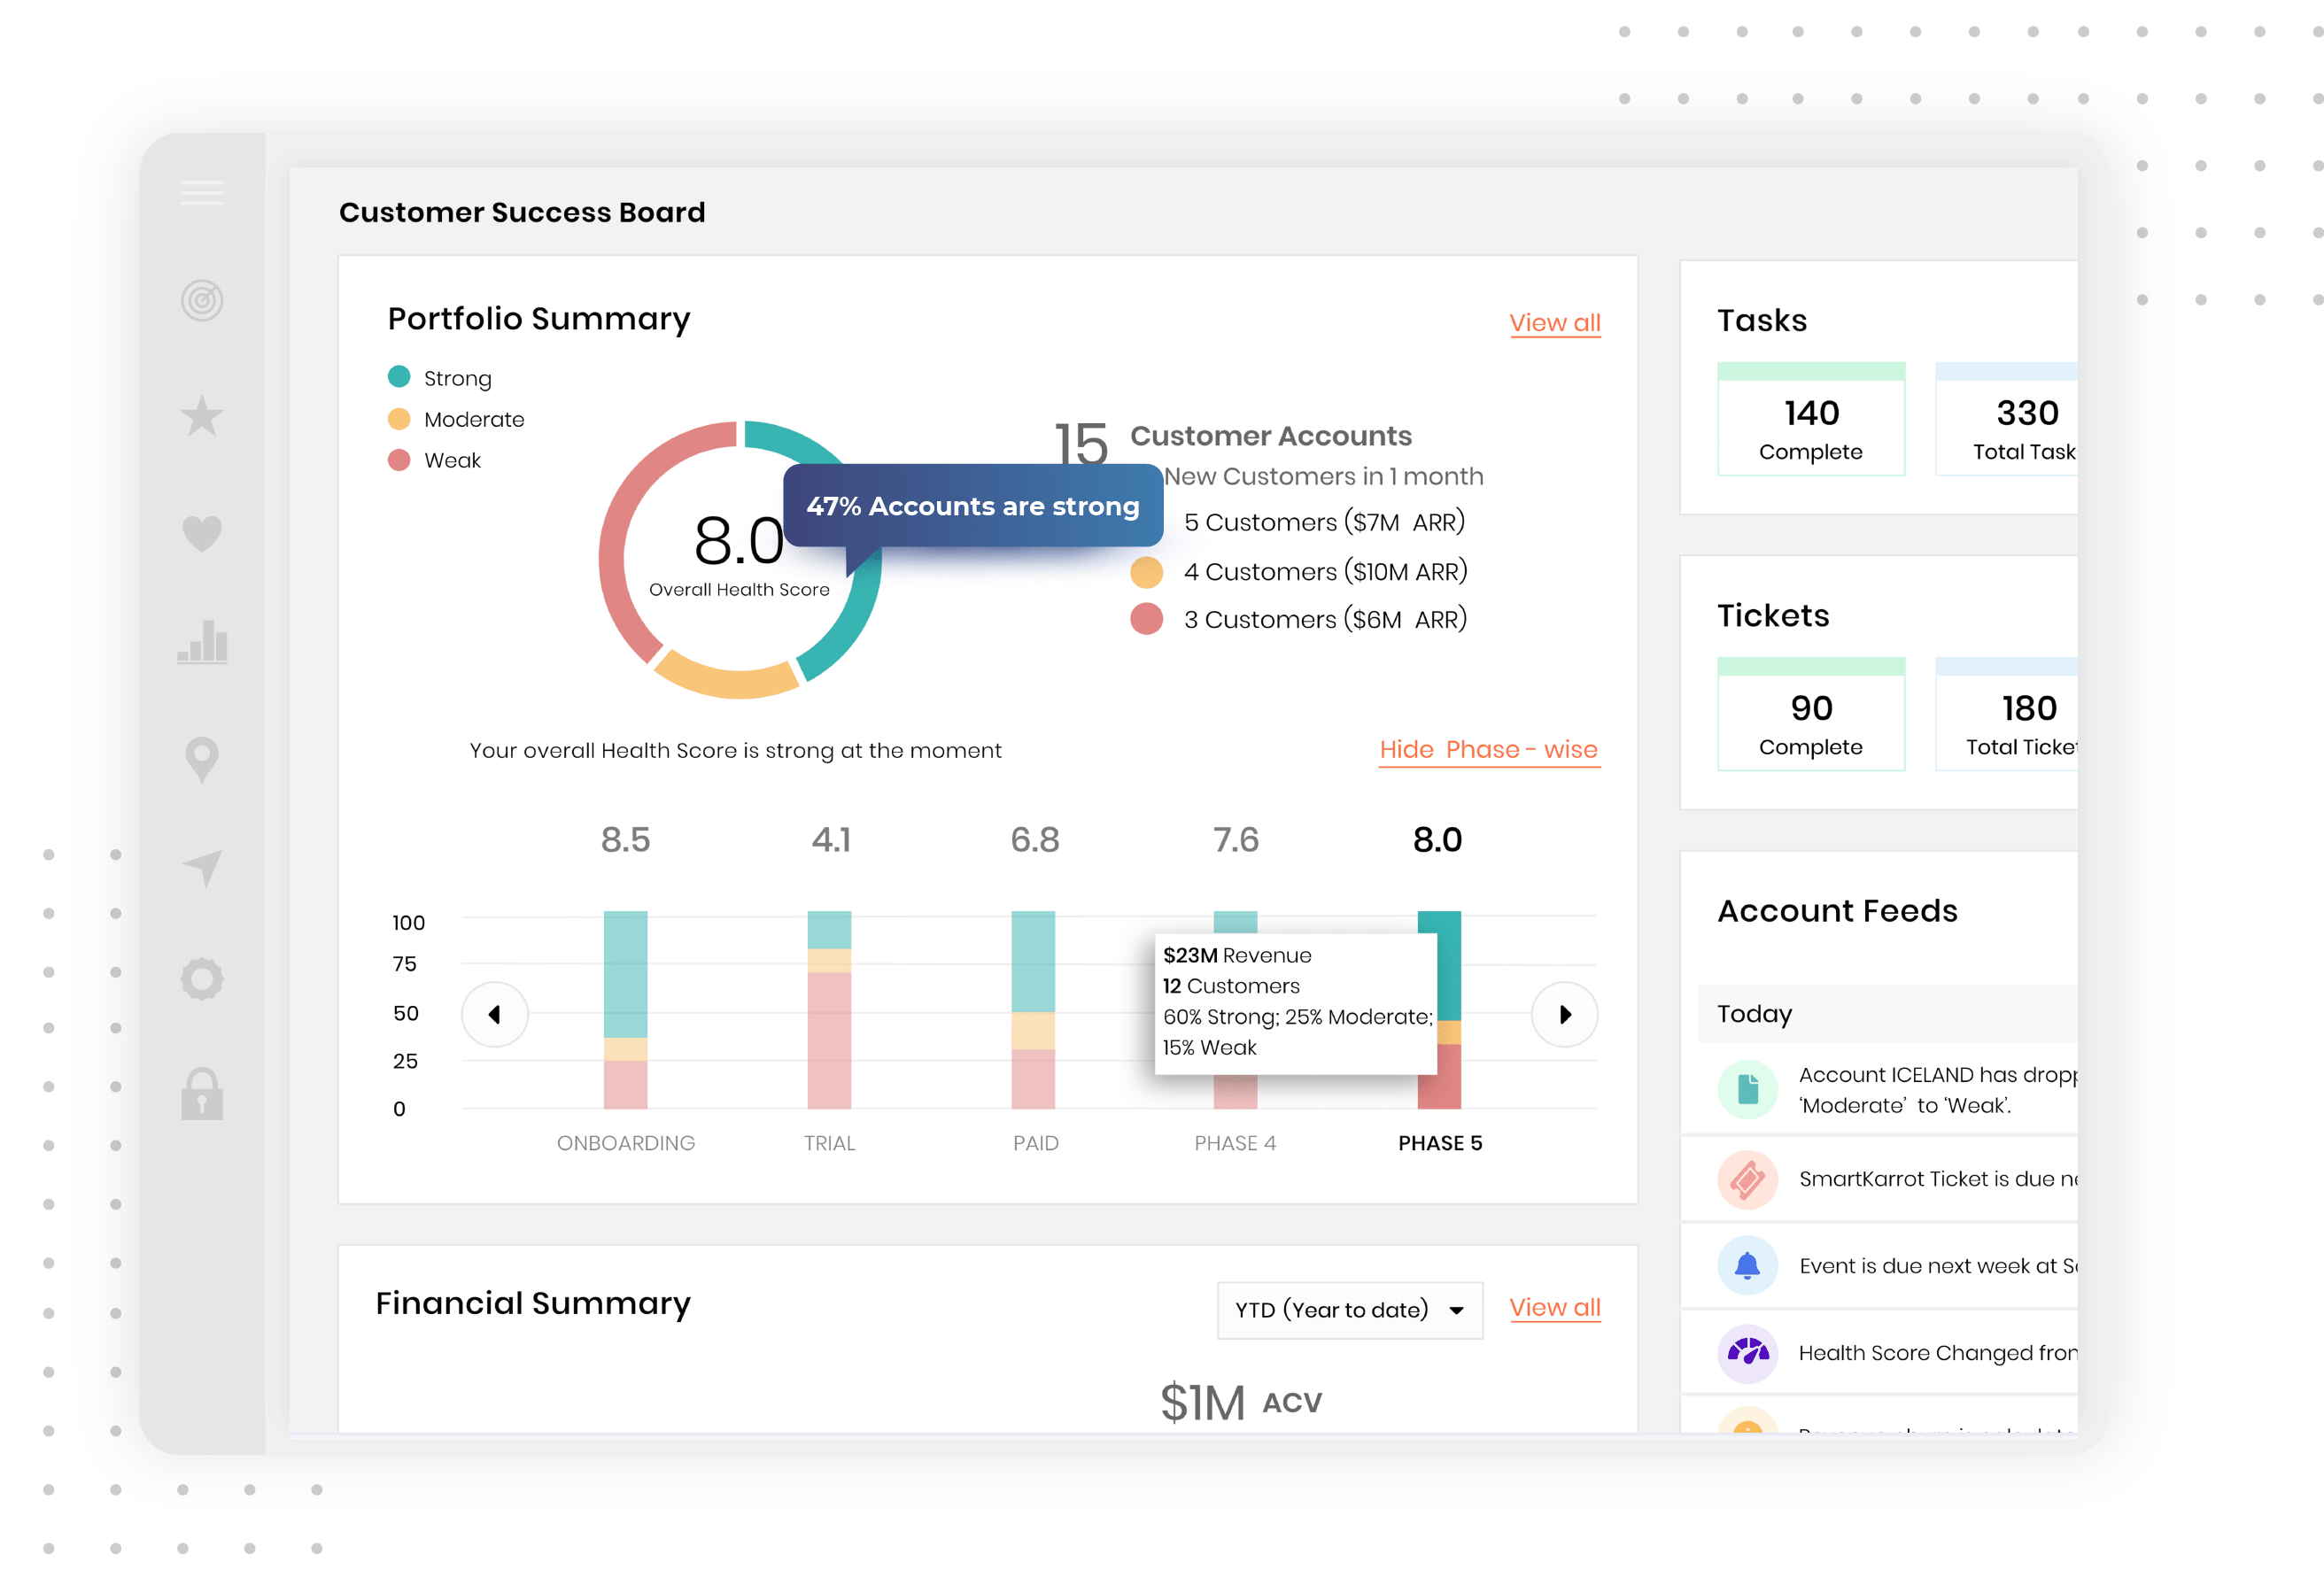 Configurable widgets for 360 customer view